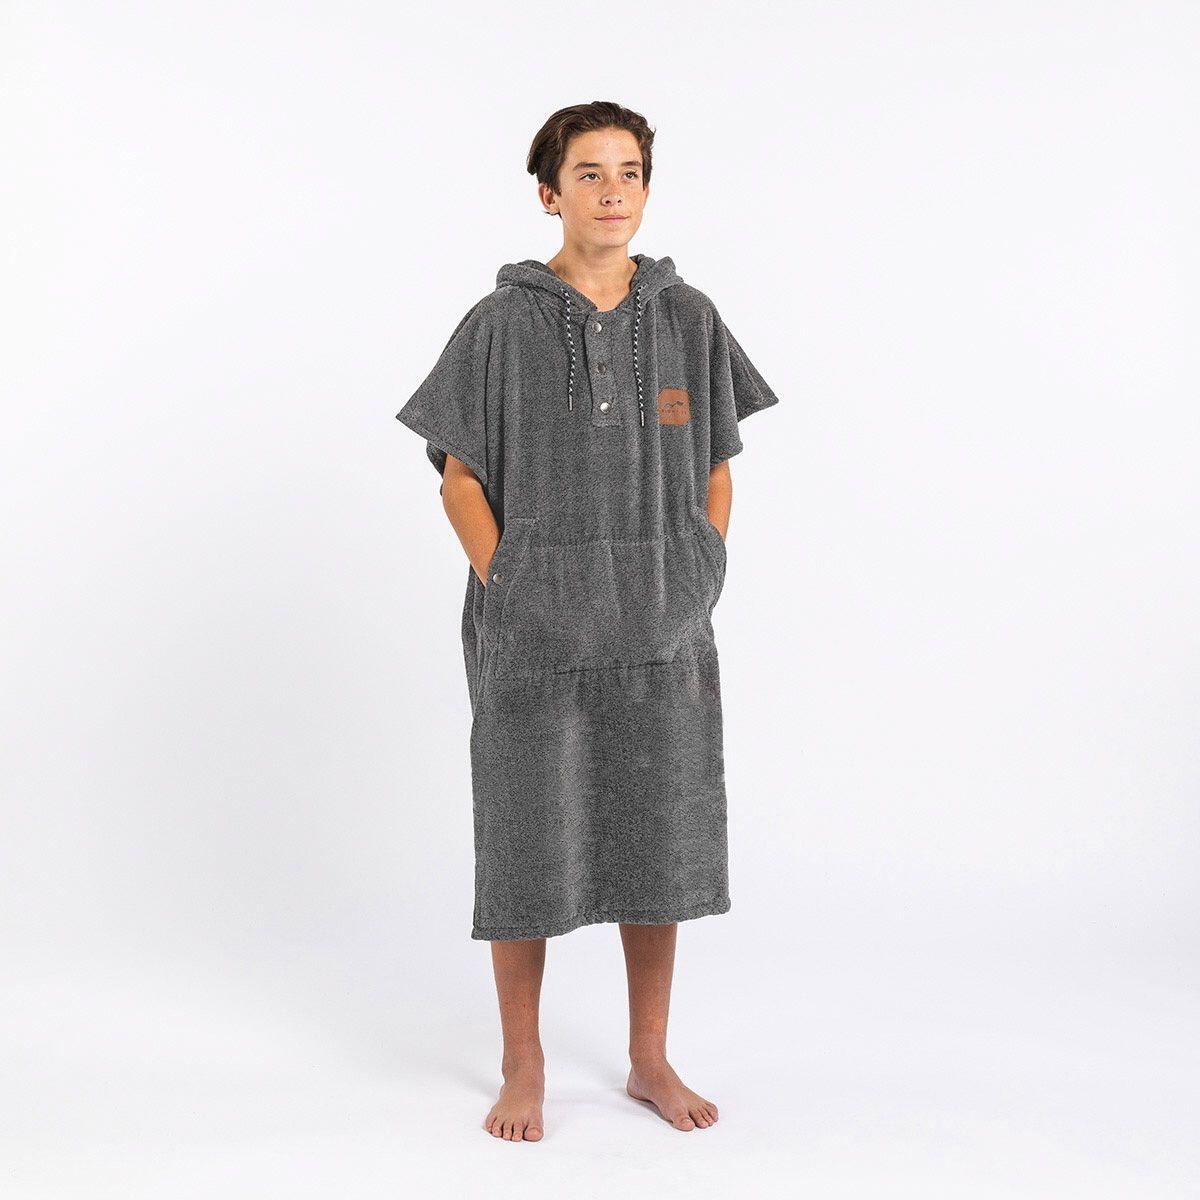 The Digs Poncho